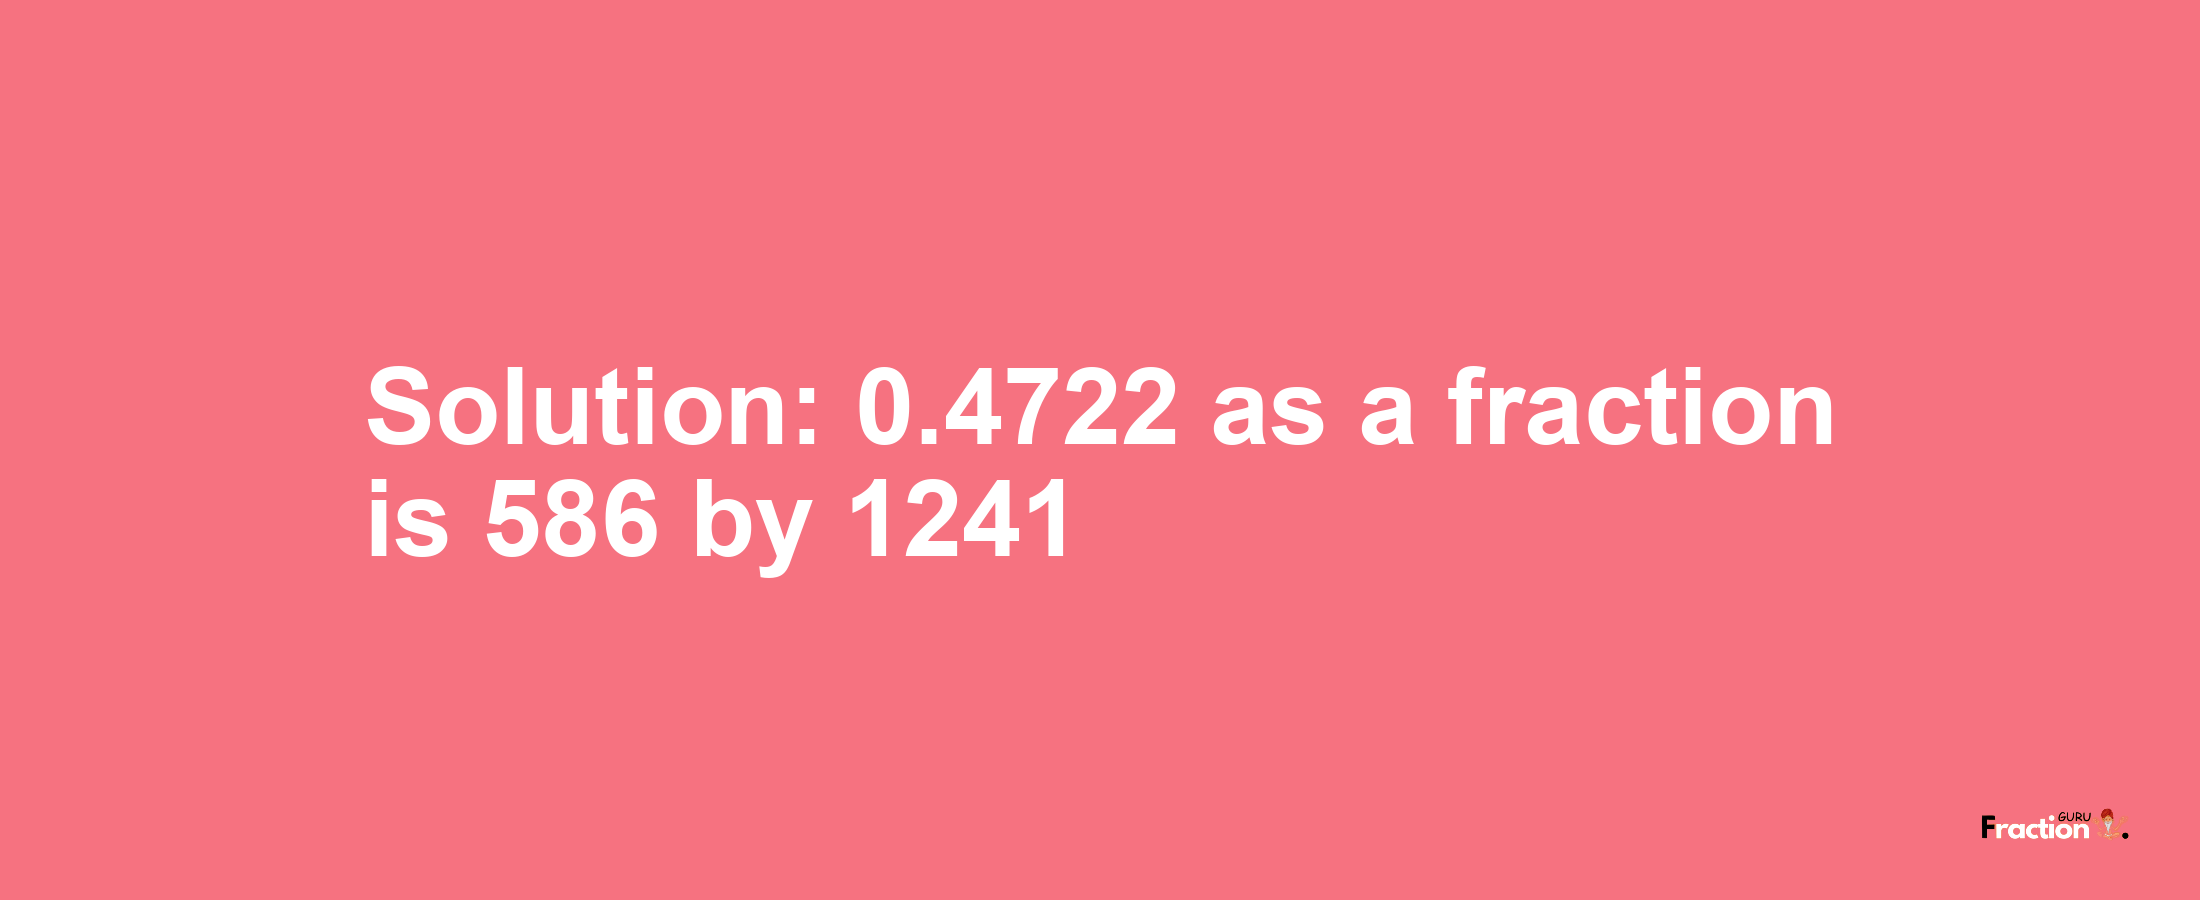 Solution:0.4722 as a fraction is 586/1241